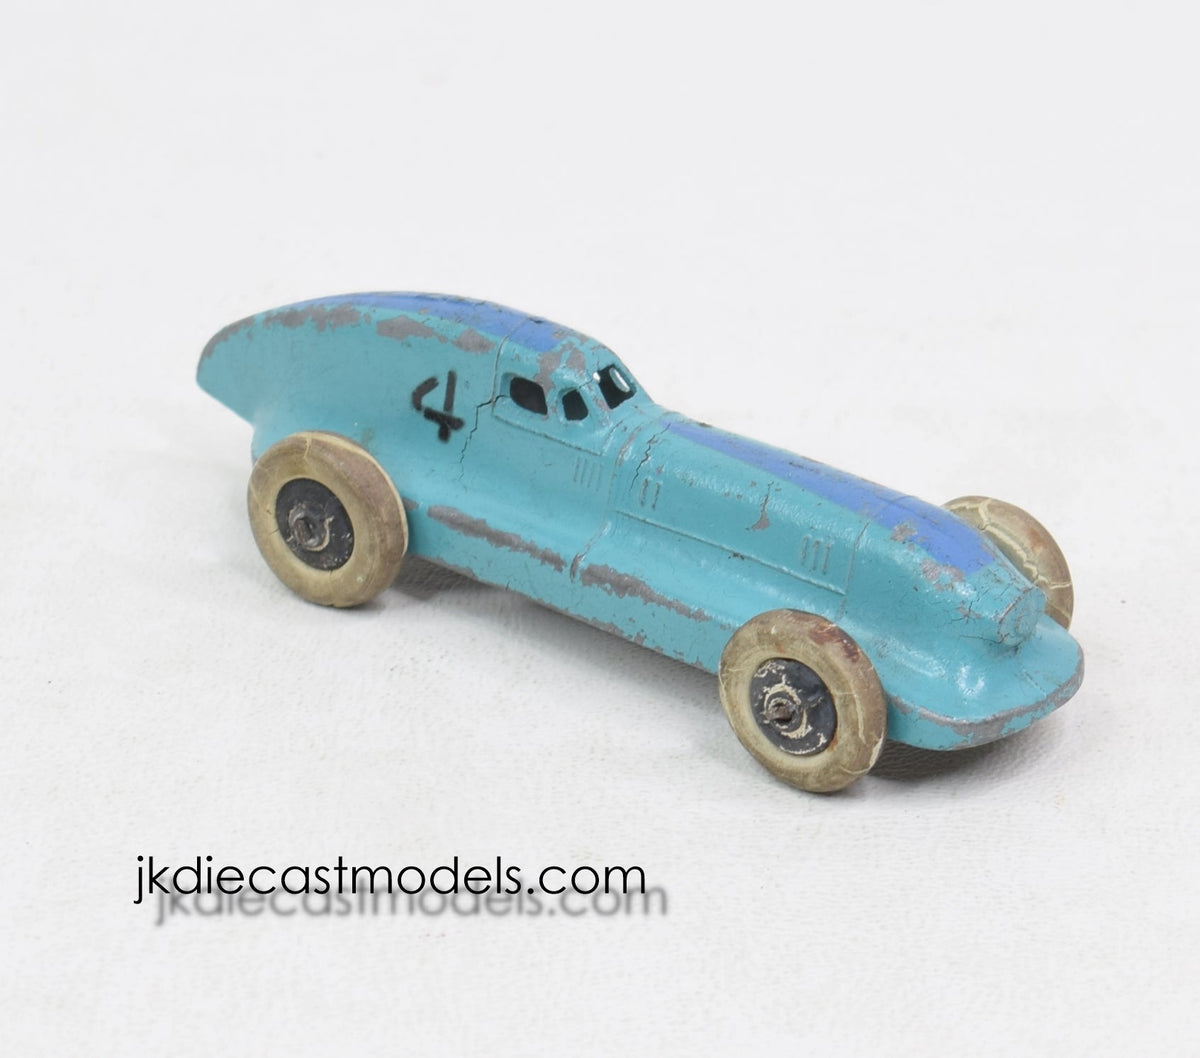 Pre war Dinky toy 23b Hotchkiss Racing car 'River Rhine Collection'